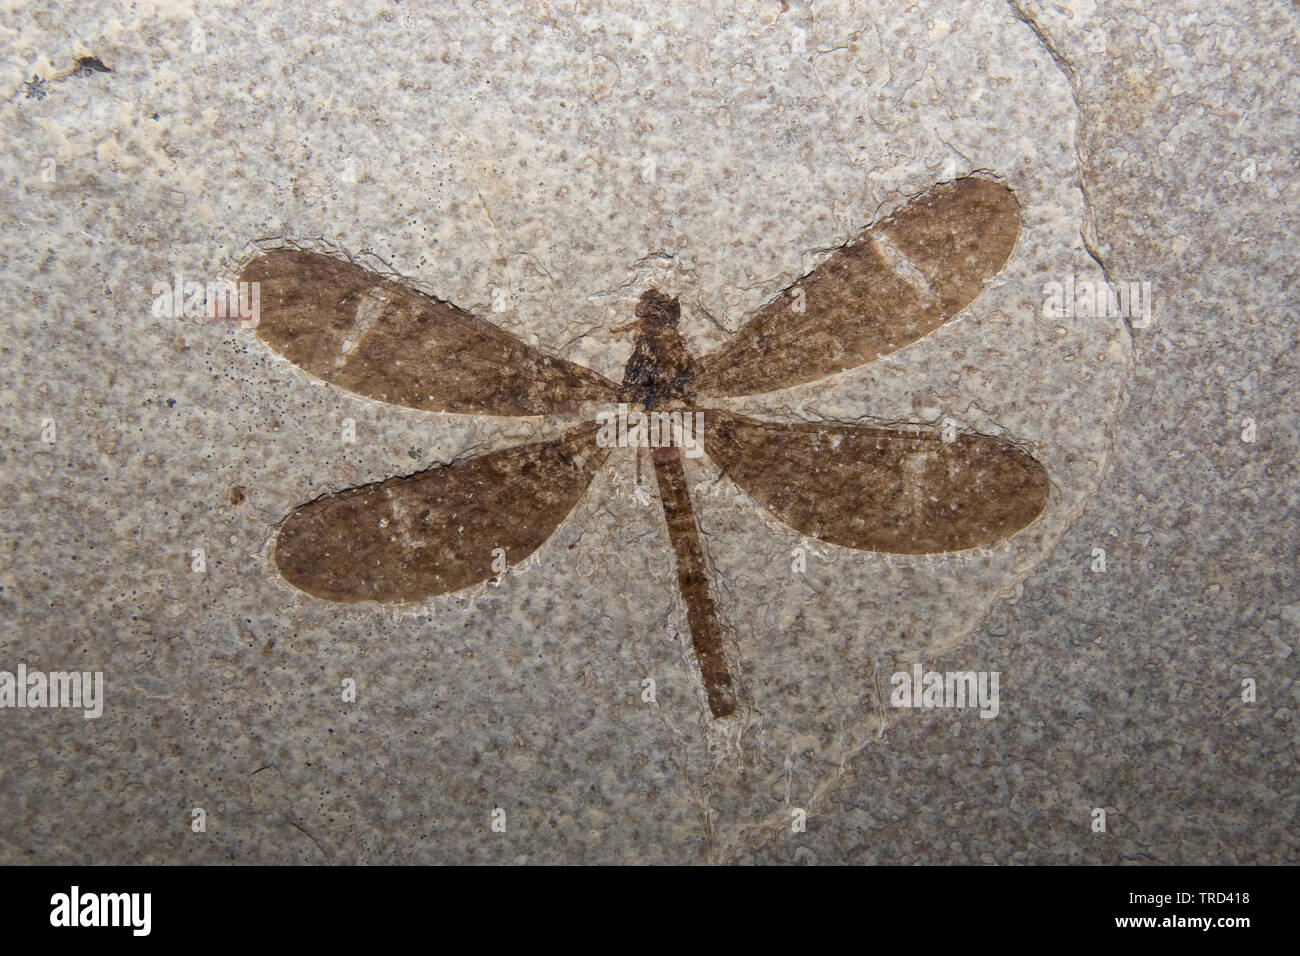 Libellula fossile, Fossil Butte National Monument, Wyoming Foto Stock